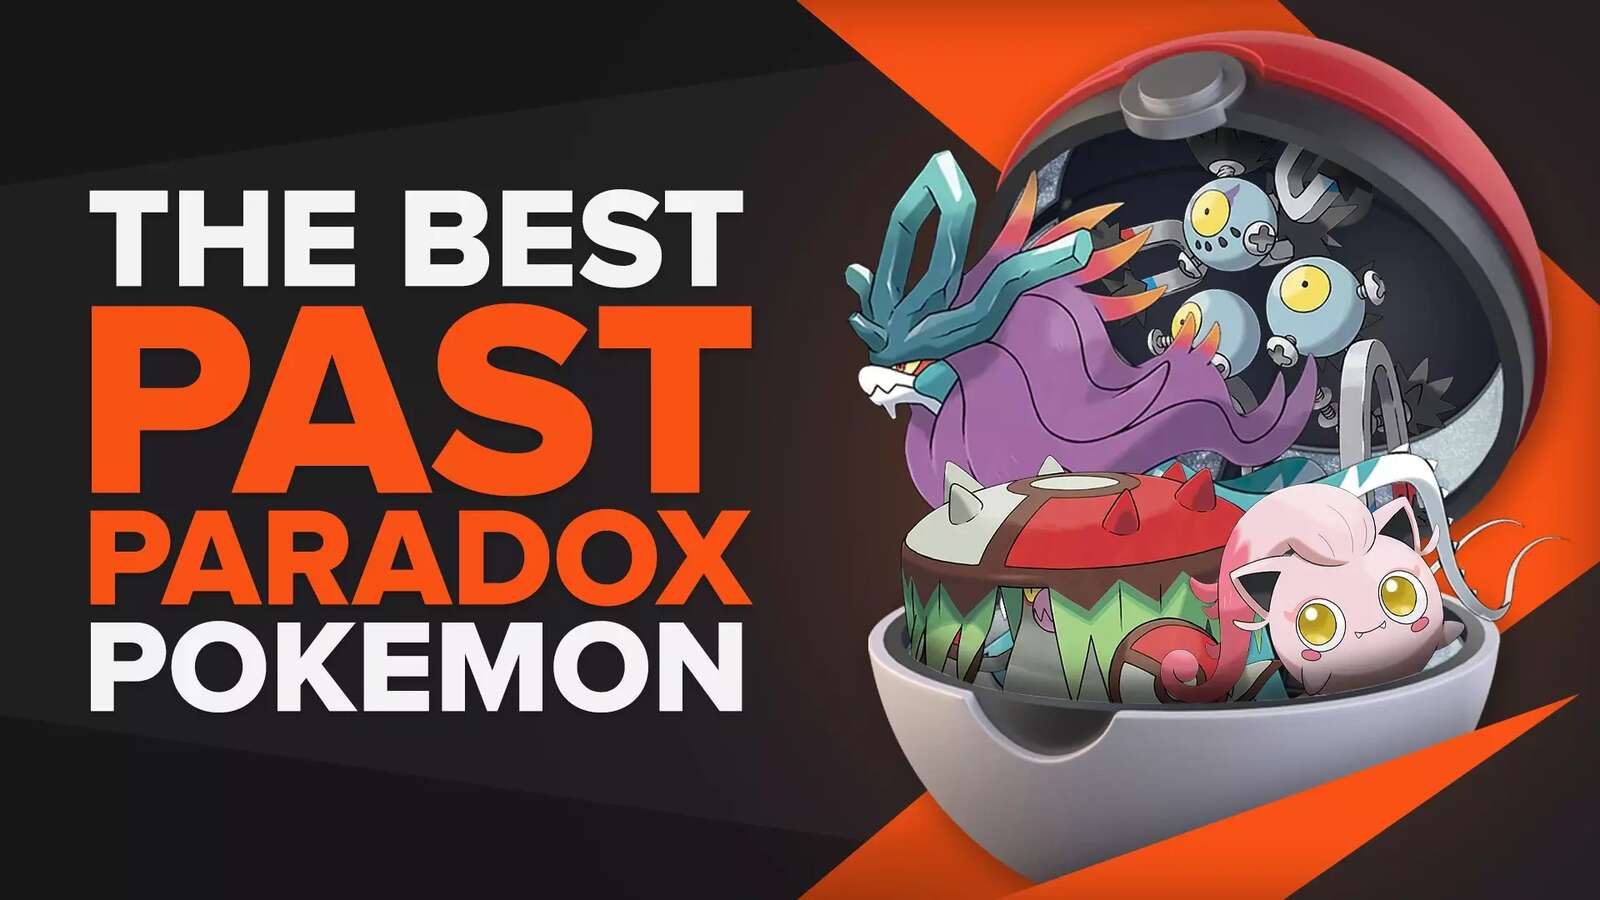 The 10 Absolute Best Past Paradox Pokemon [Ranked]